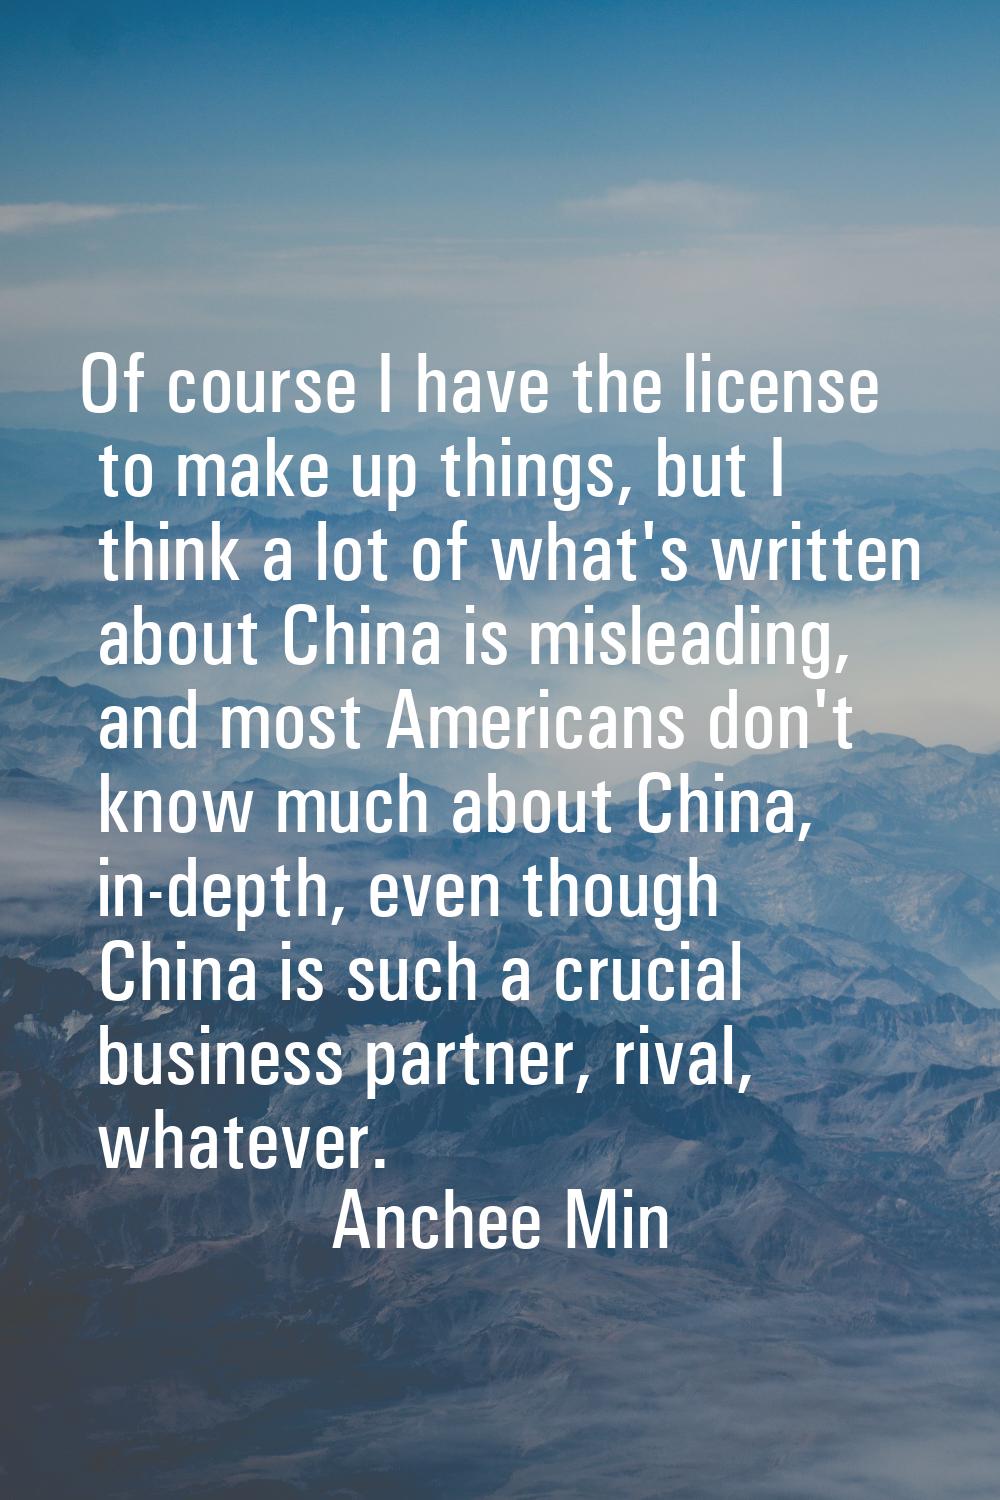 Of course I have the license to make up things, but I think a lot of what's written about China is 